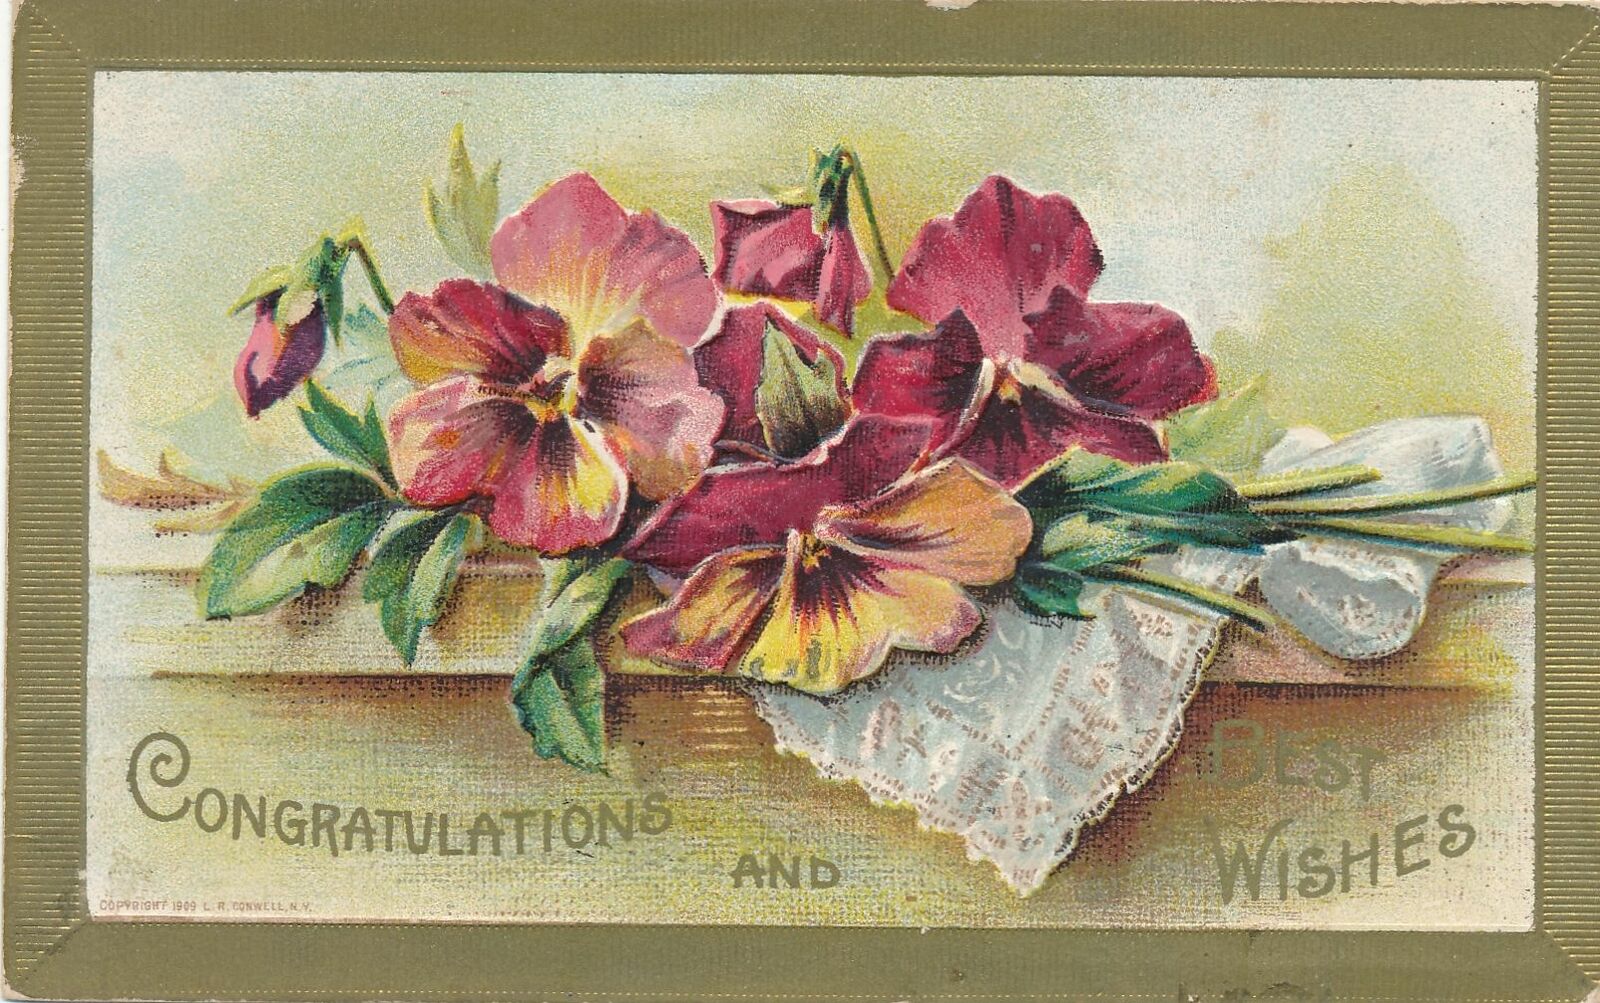 Flowers and Handkerchief Congratulations and Best Wishes Postcard - 1909